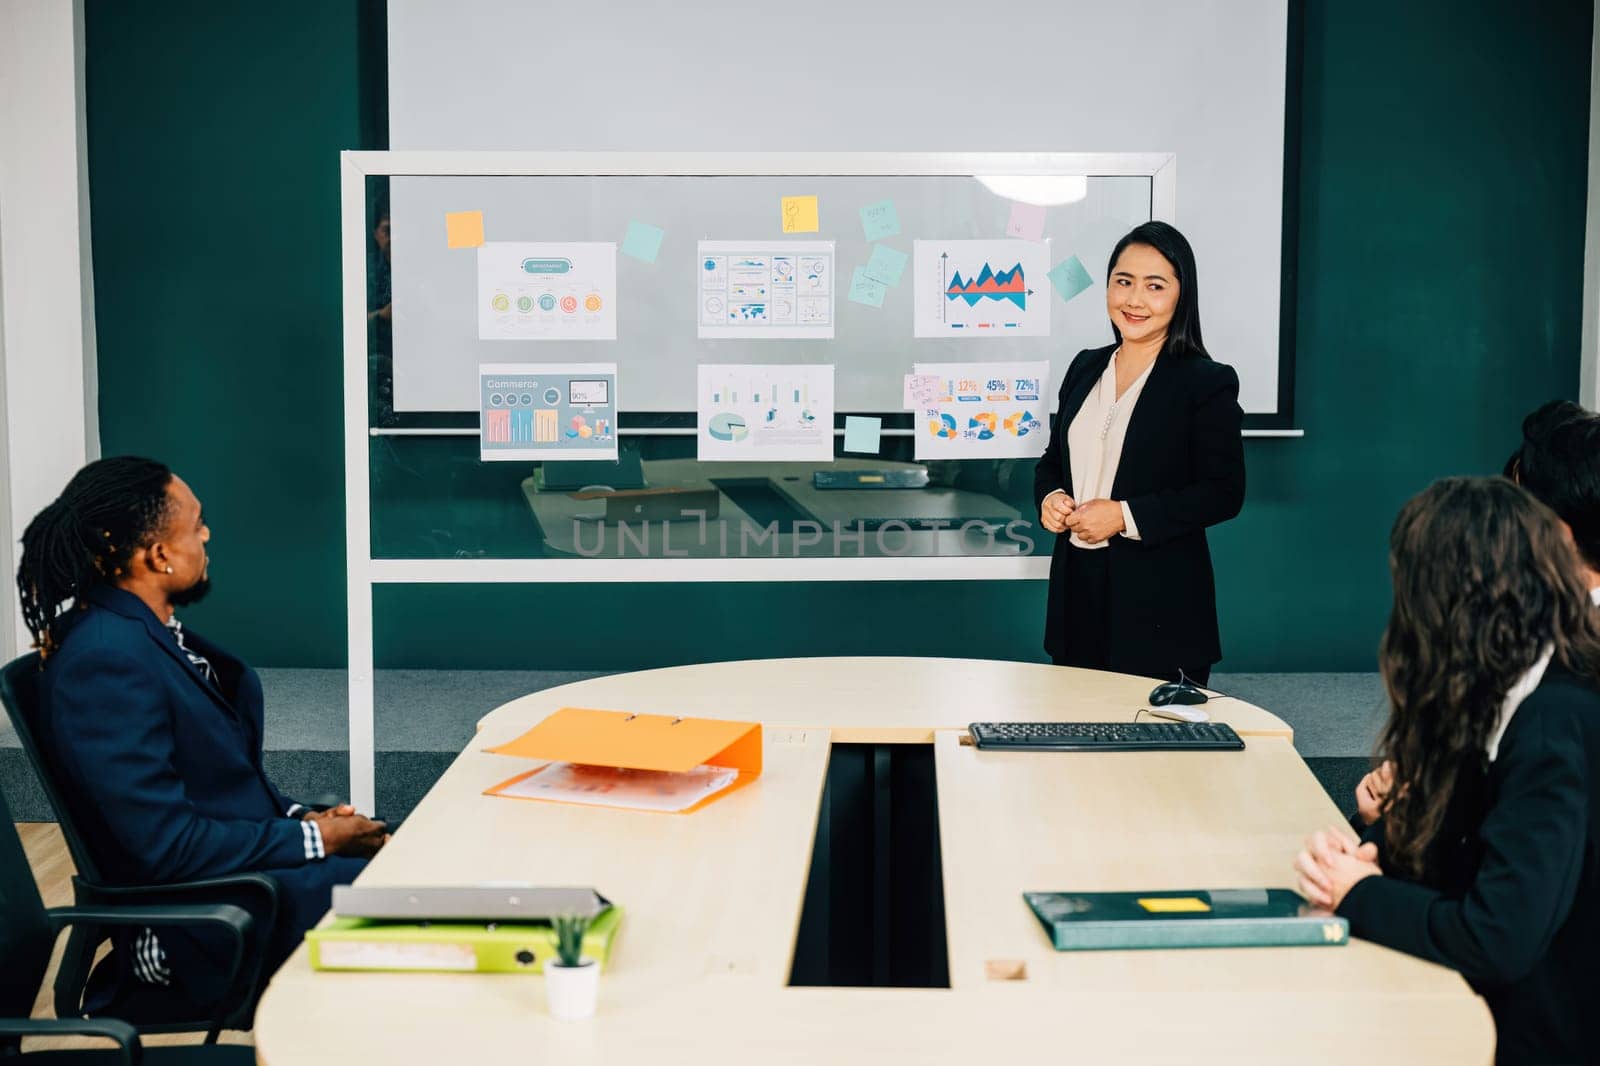 Businesswoman expert in finance and marketing, leads seminar in office conference room. She explains innovative e-commerce strategy, encouraging discussion, cooperation, diversity among colleagues. by Sorapop